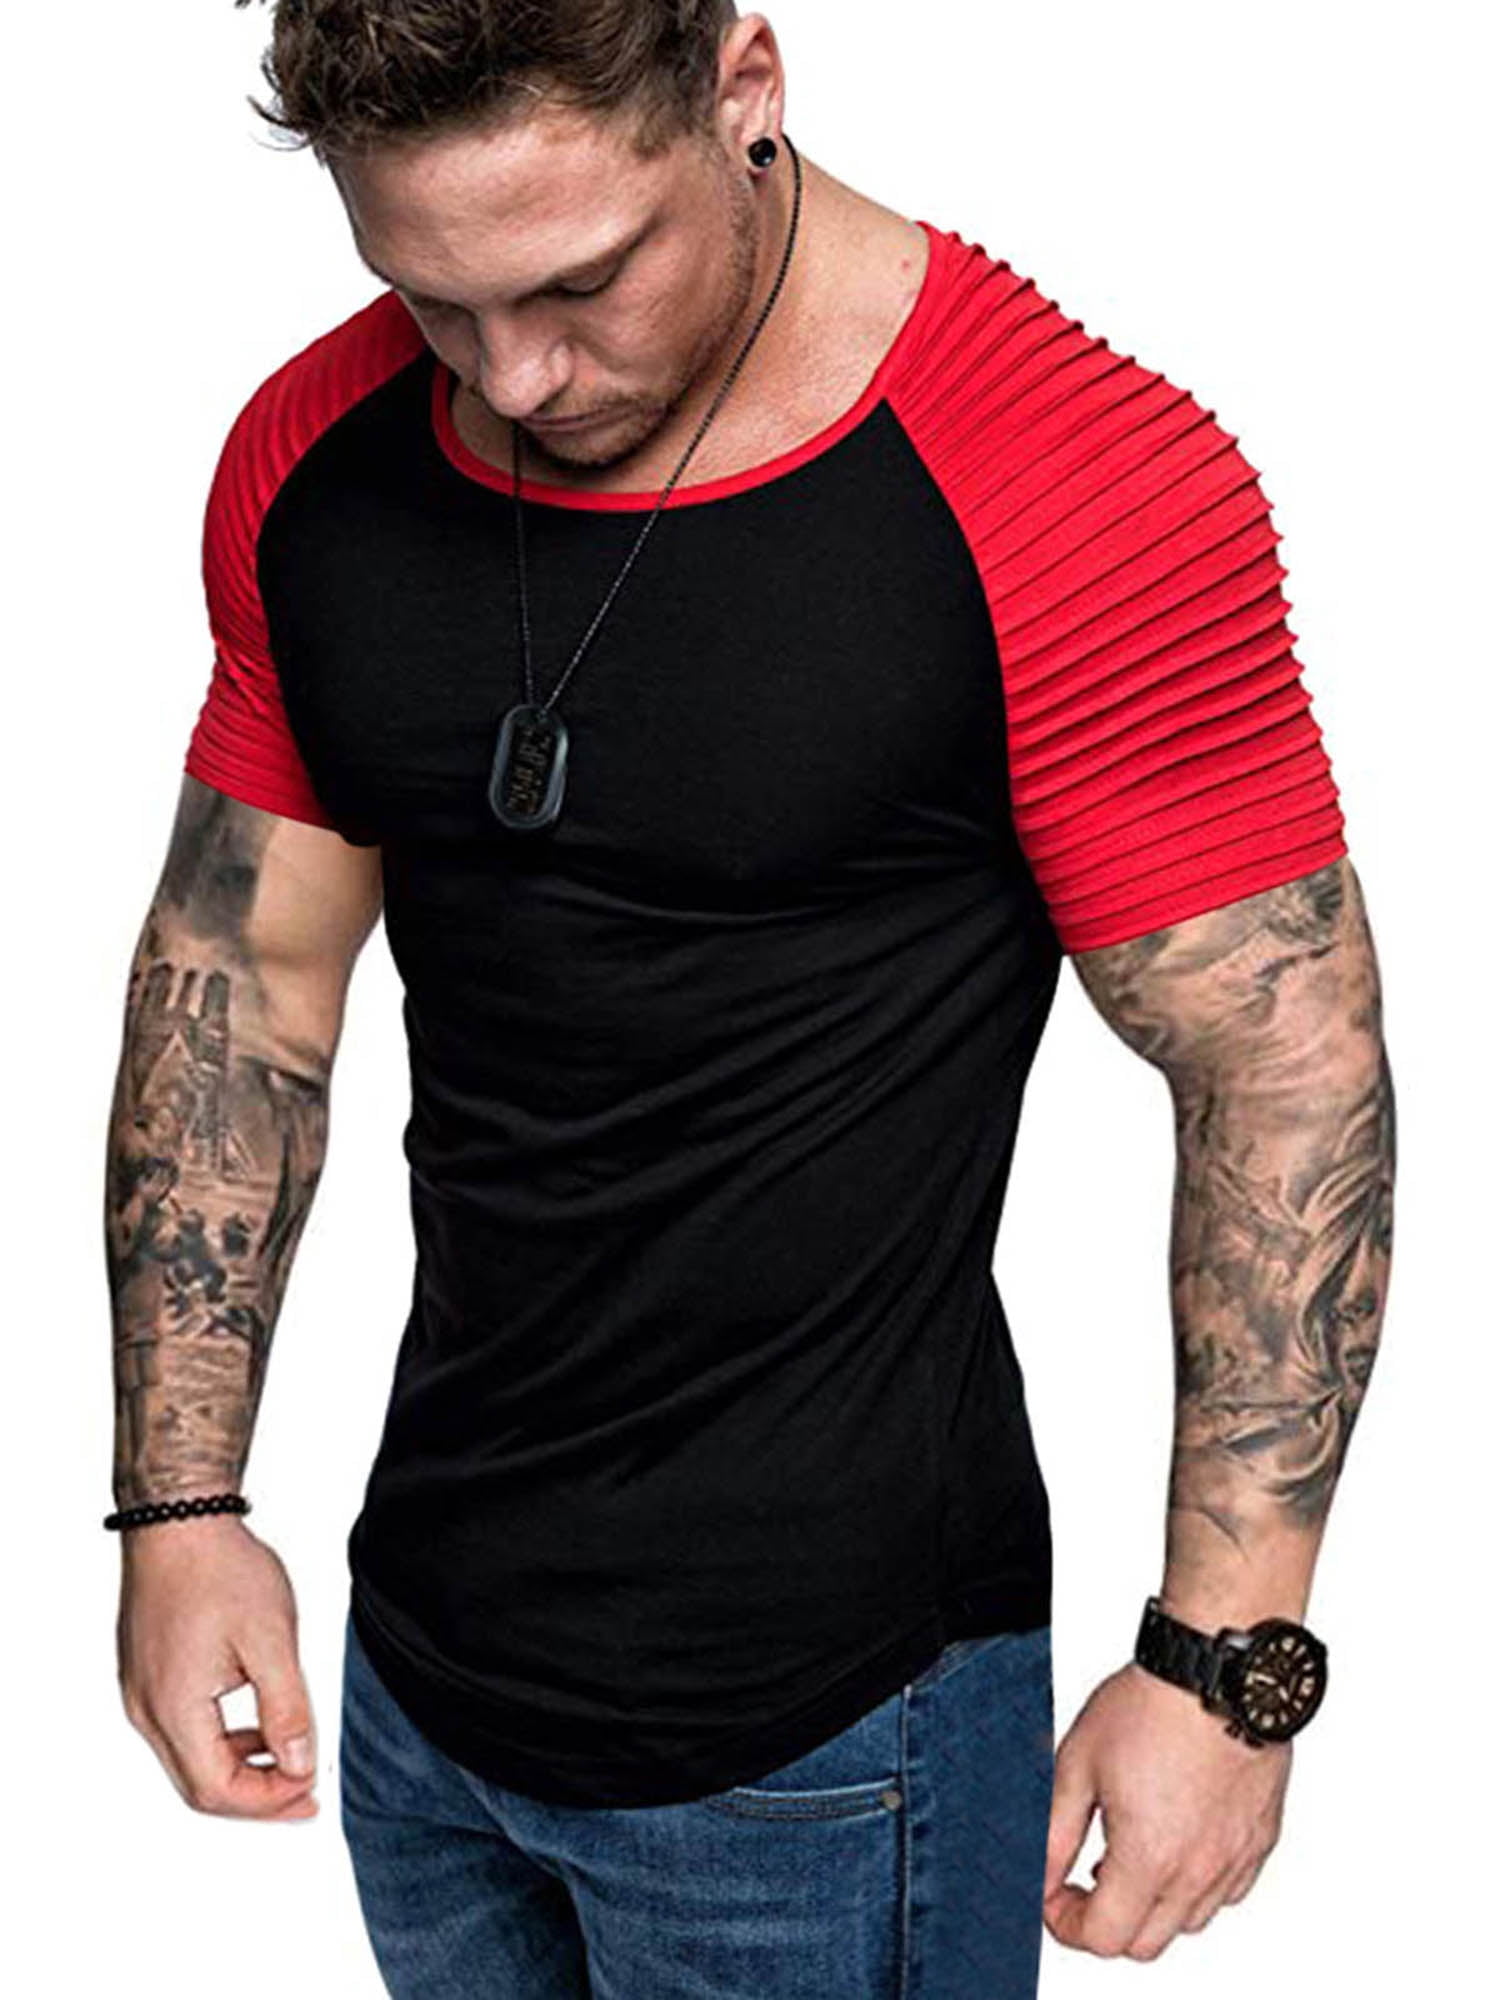 Men Solid Crew Neck Short Sleeves T-shirt Casual Summer Slim Fit Muscle Tee Tops 